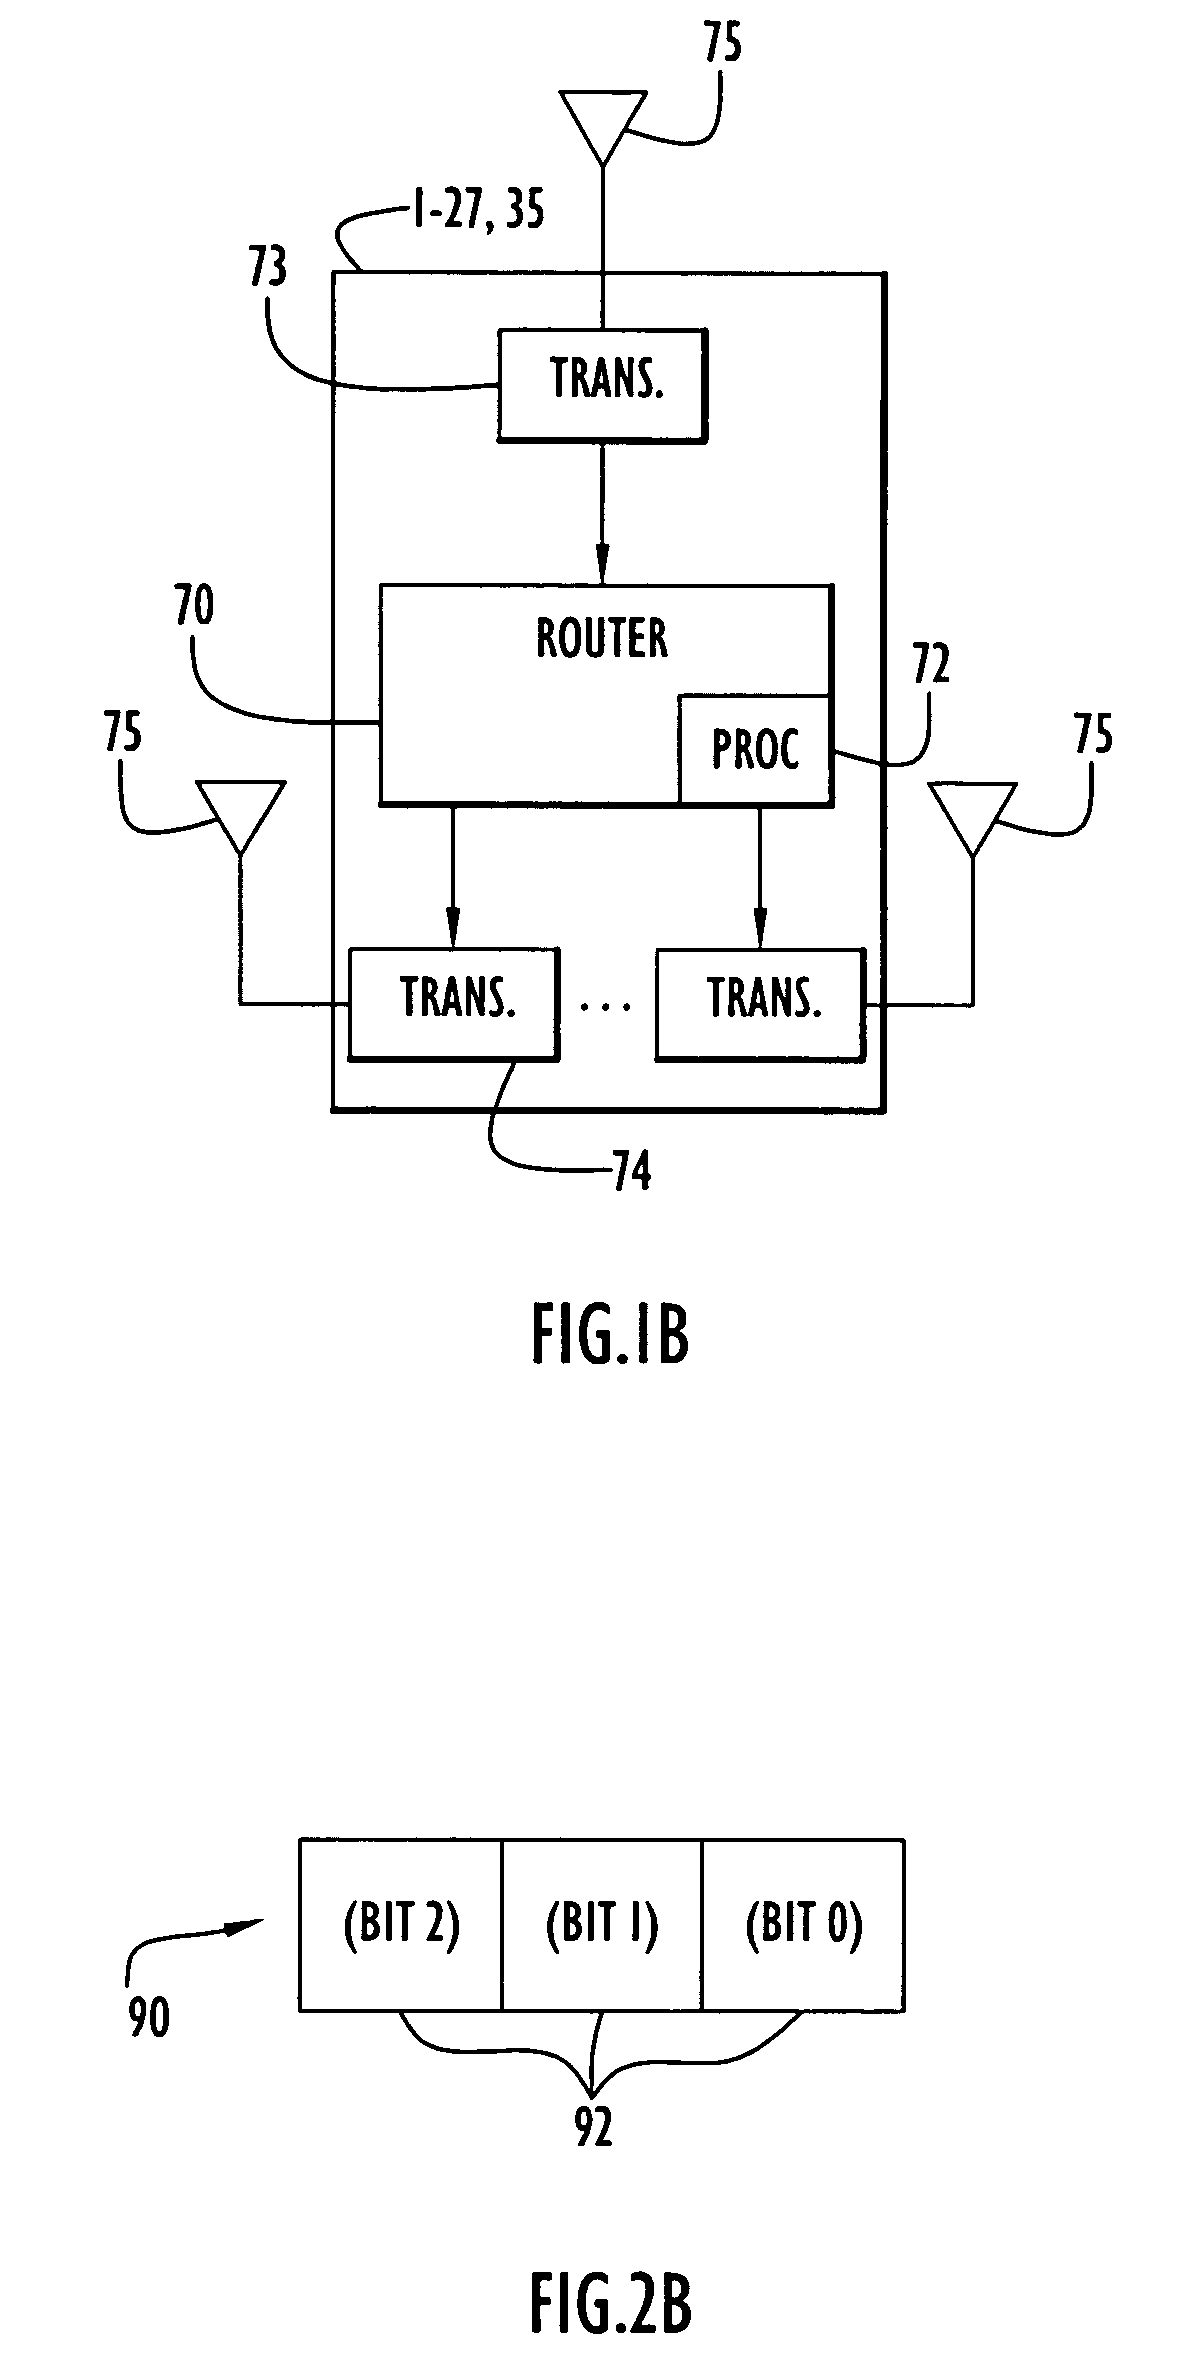 Method and apparatus for multicast packet distribution in a satellite constellation network